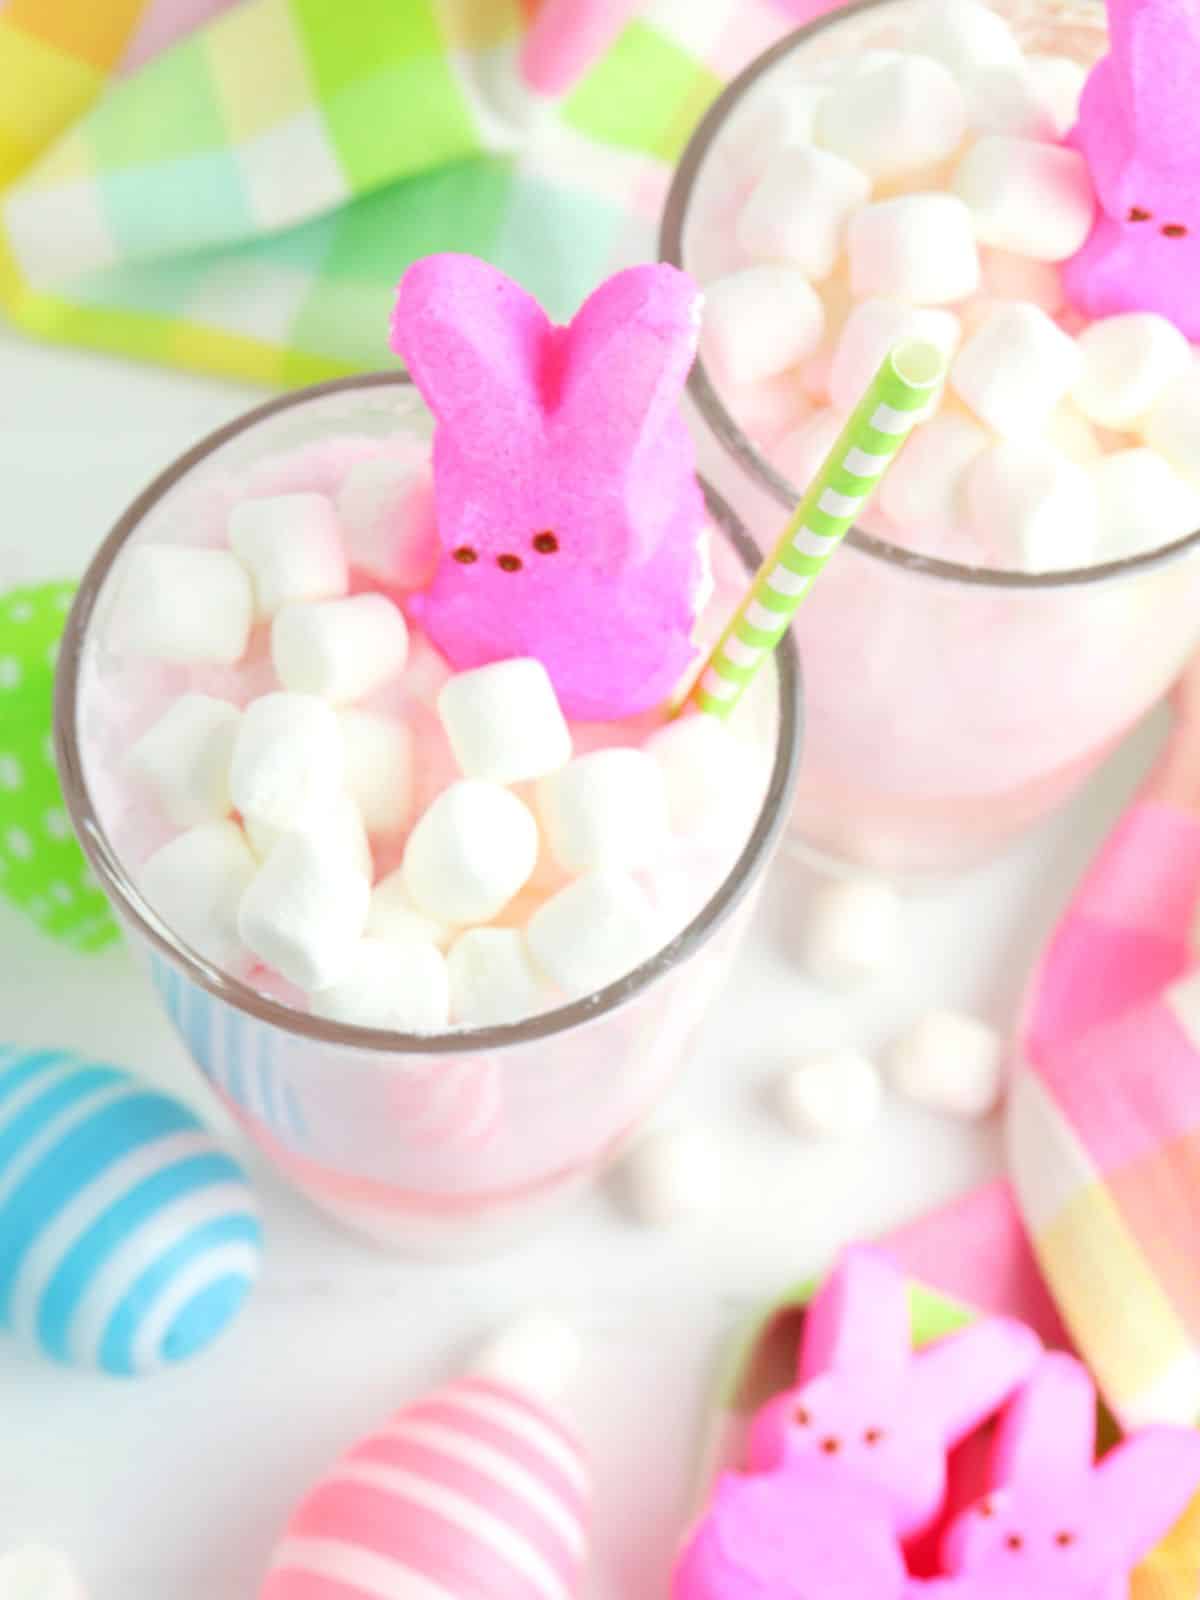 strawberry punch with marshmallow peeps and marshmallows.